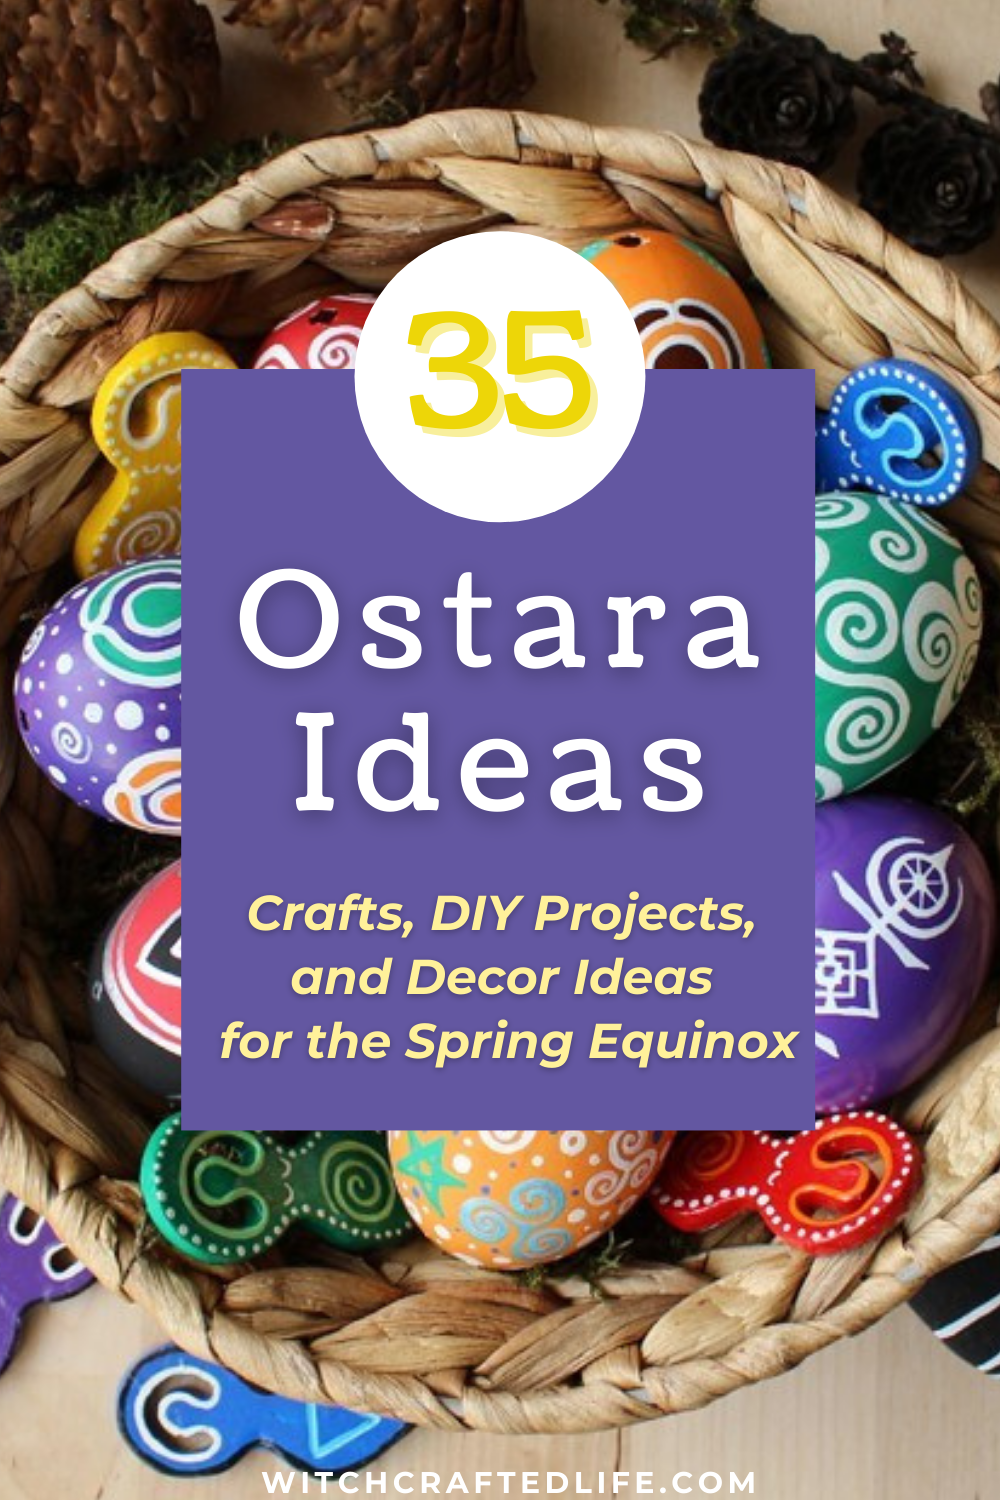 35 Wonderful Ostara Crafts, DIY Projects, and Decor Ideas for The Spring Equinox